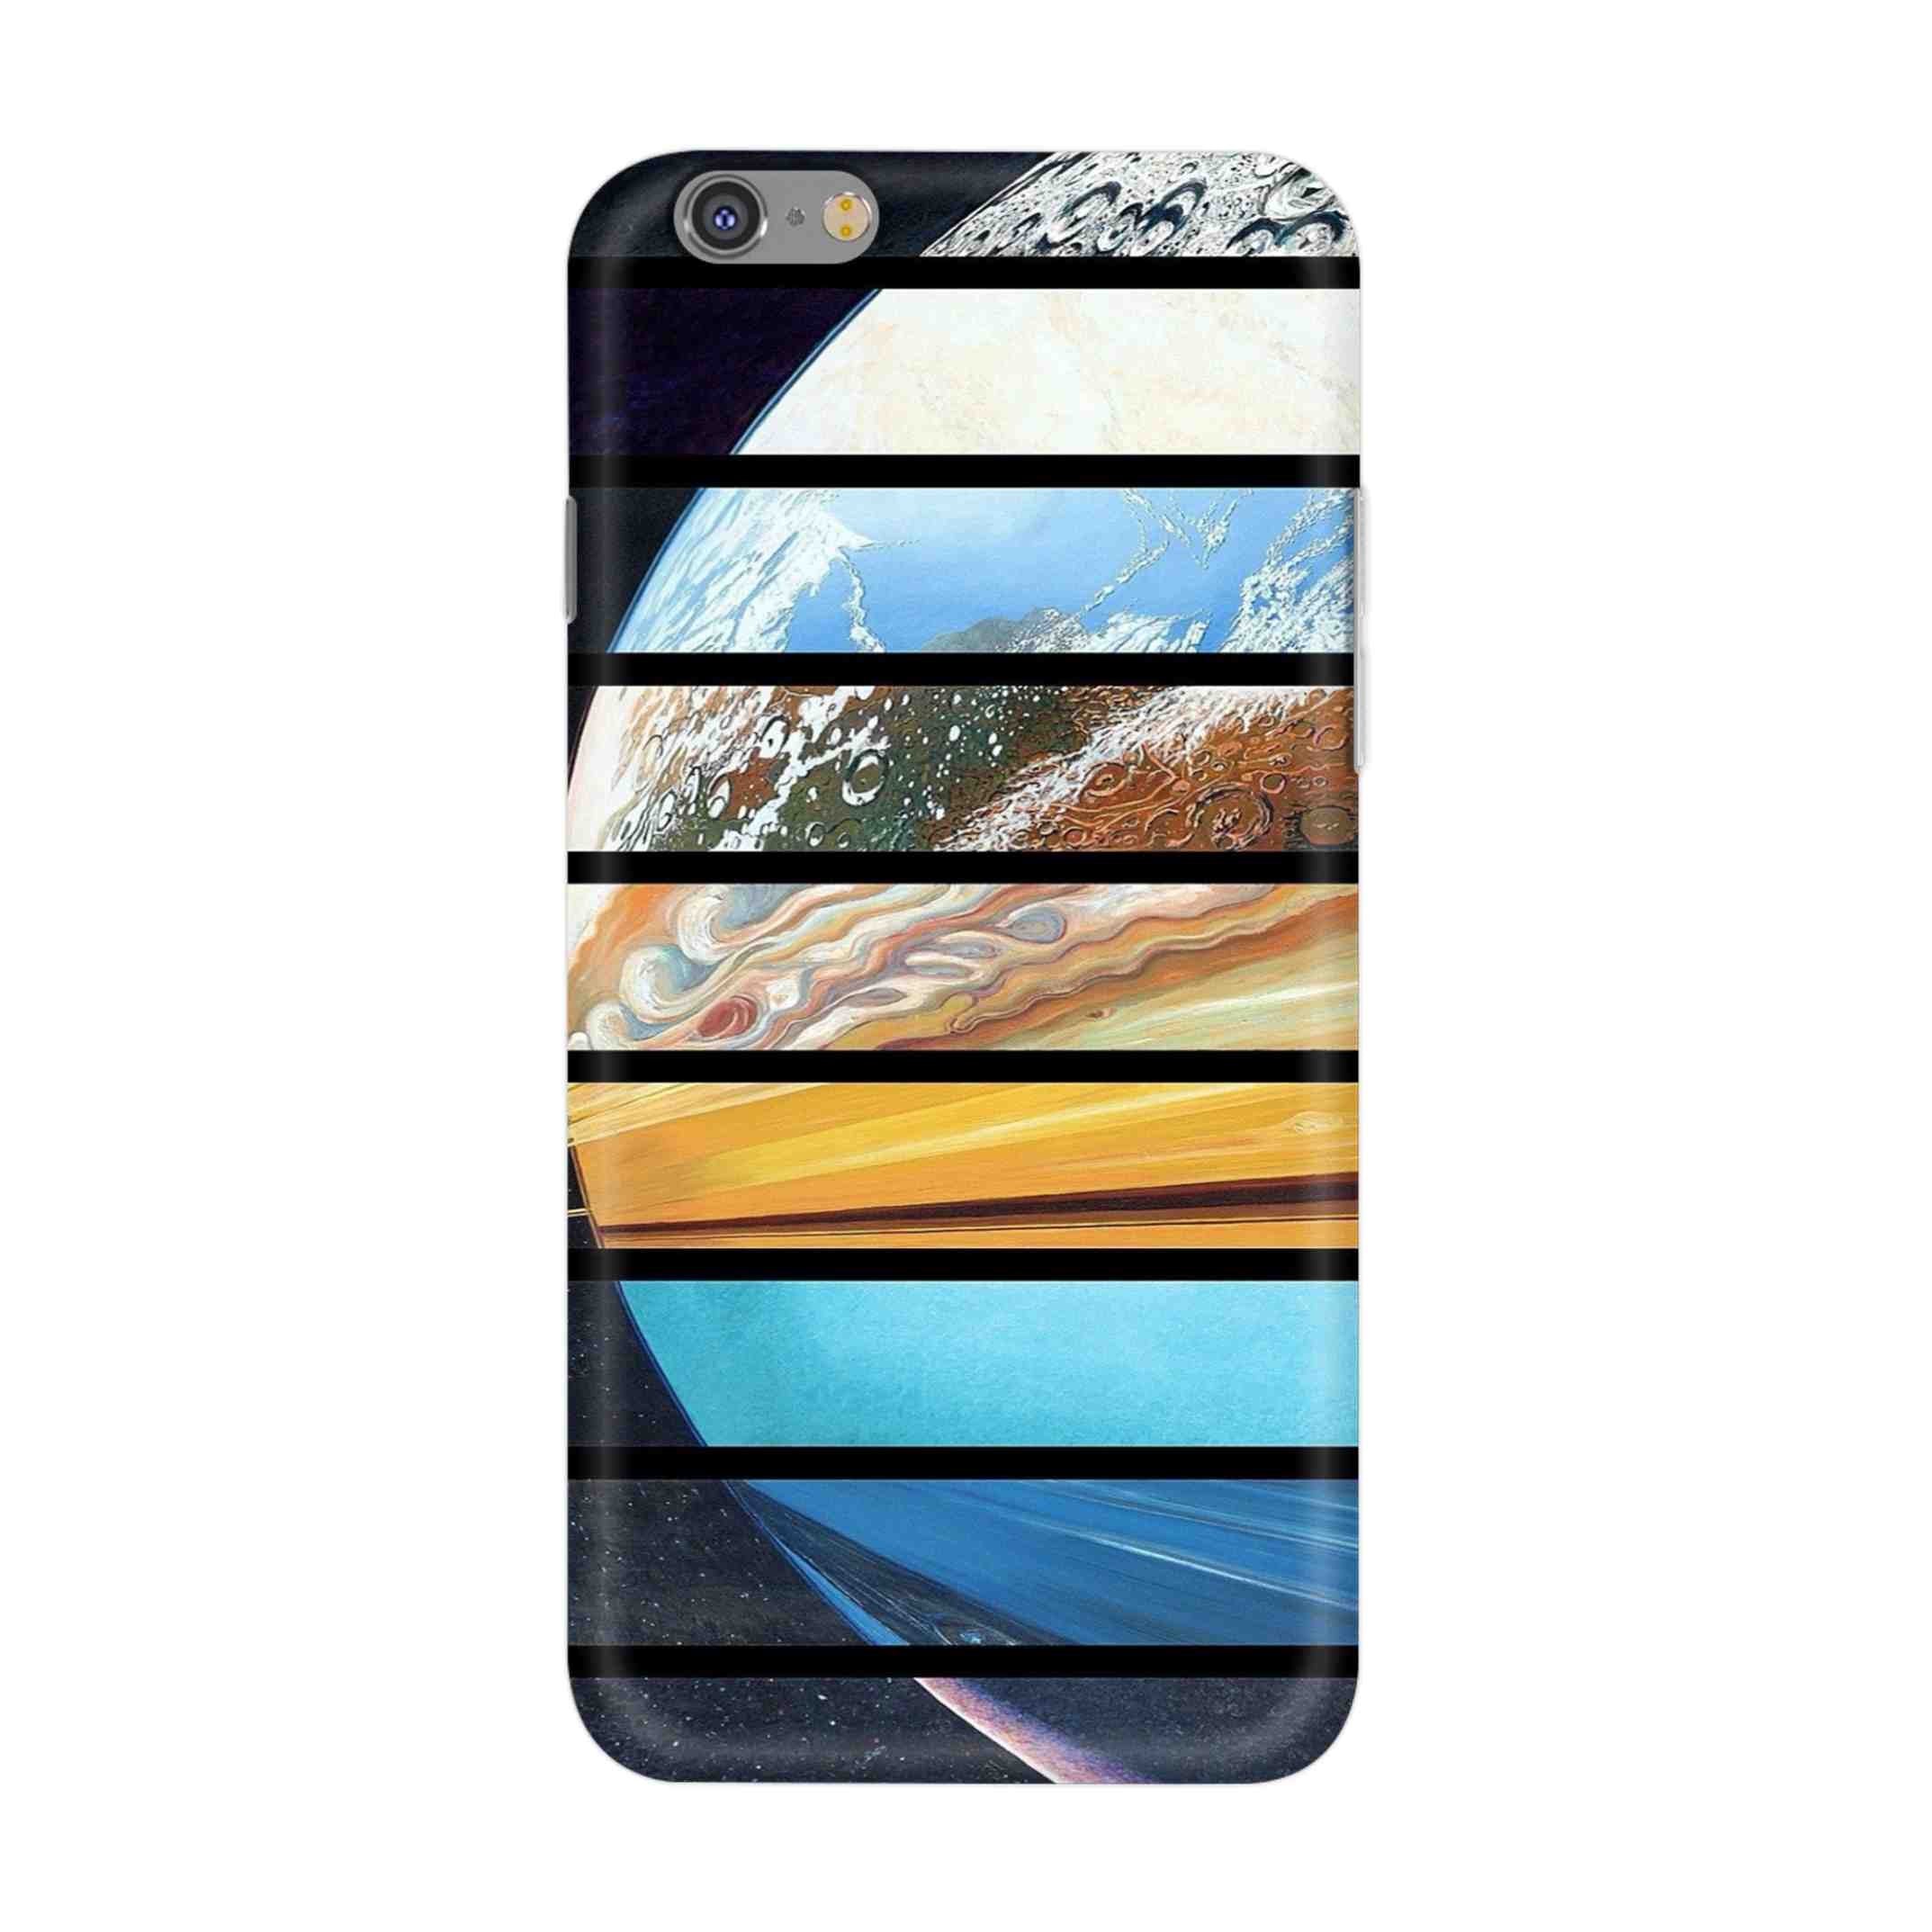 Buy Colourful Earth Hard Back Mobile Phone Case/Cover For iPhone 6 / 6s Online